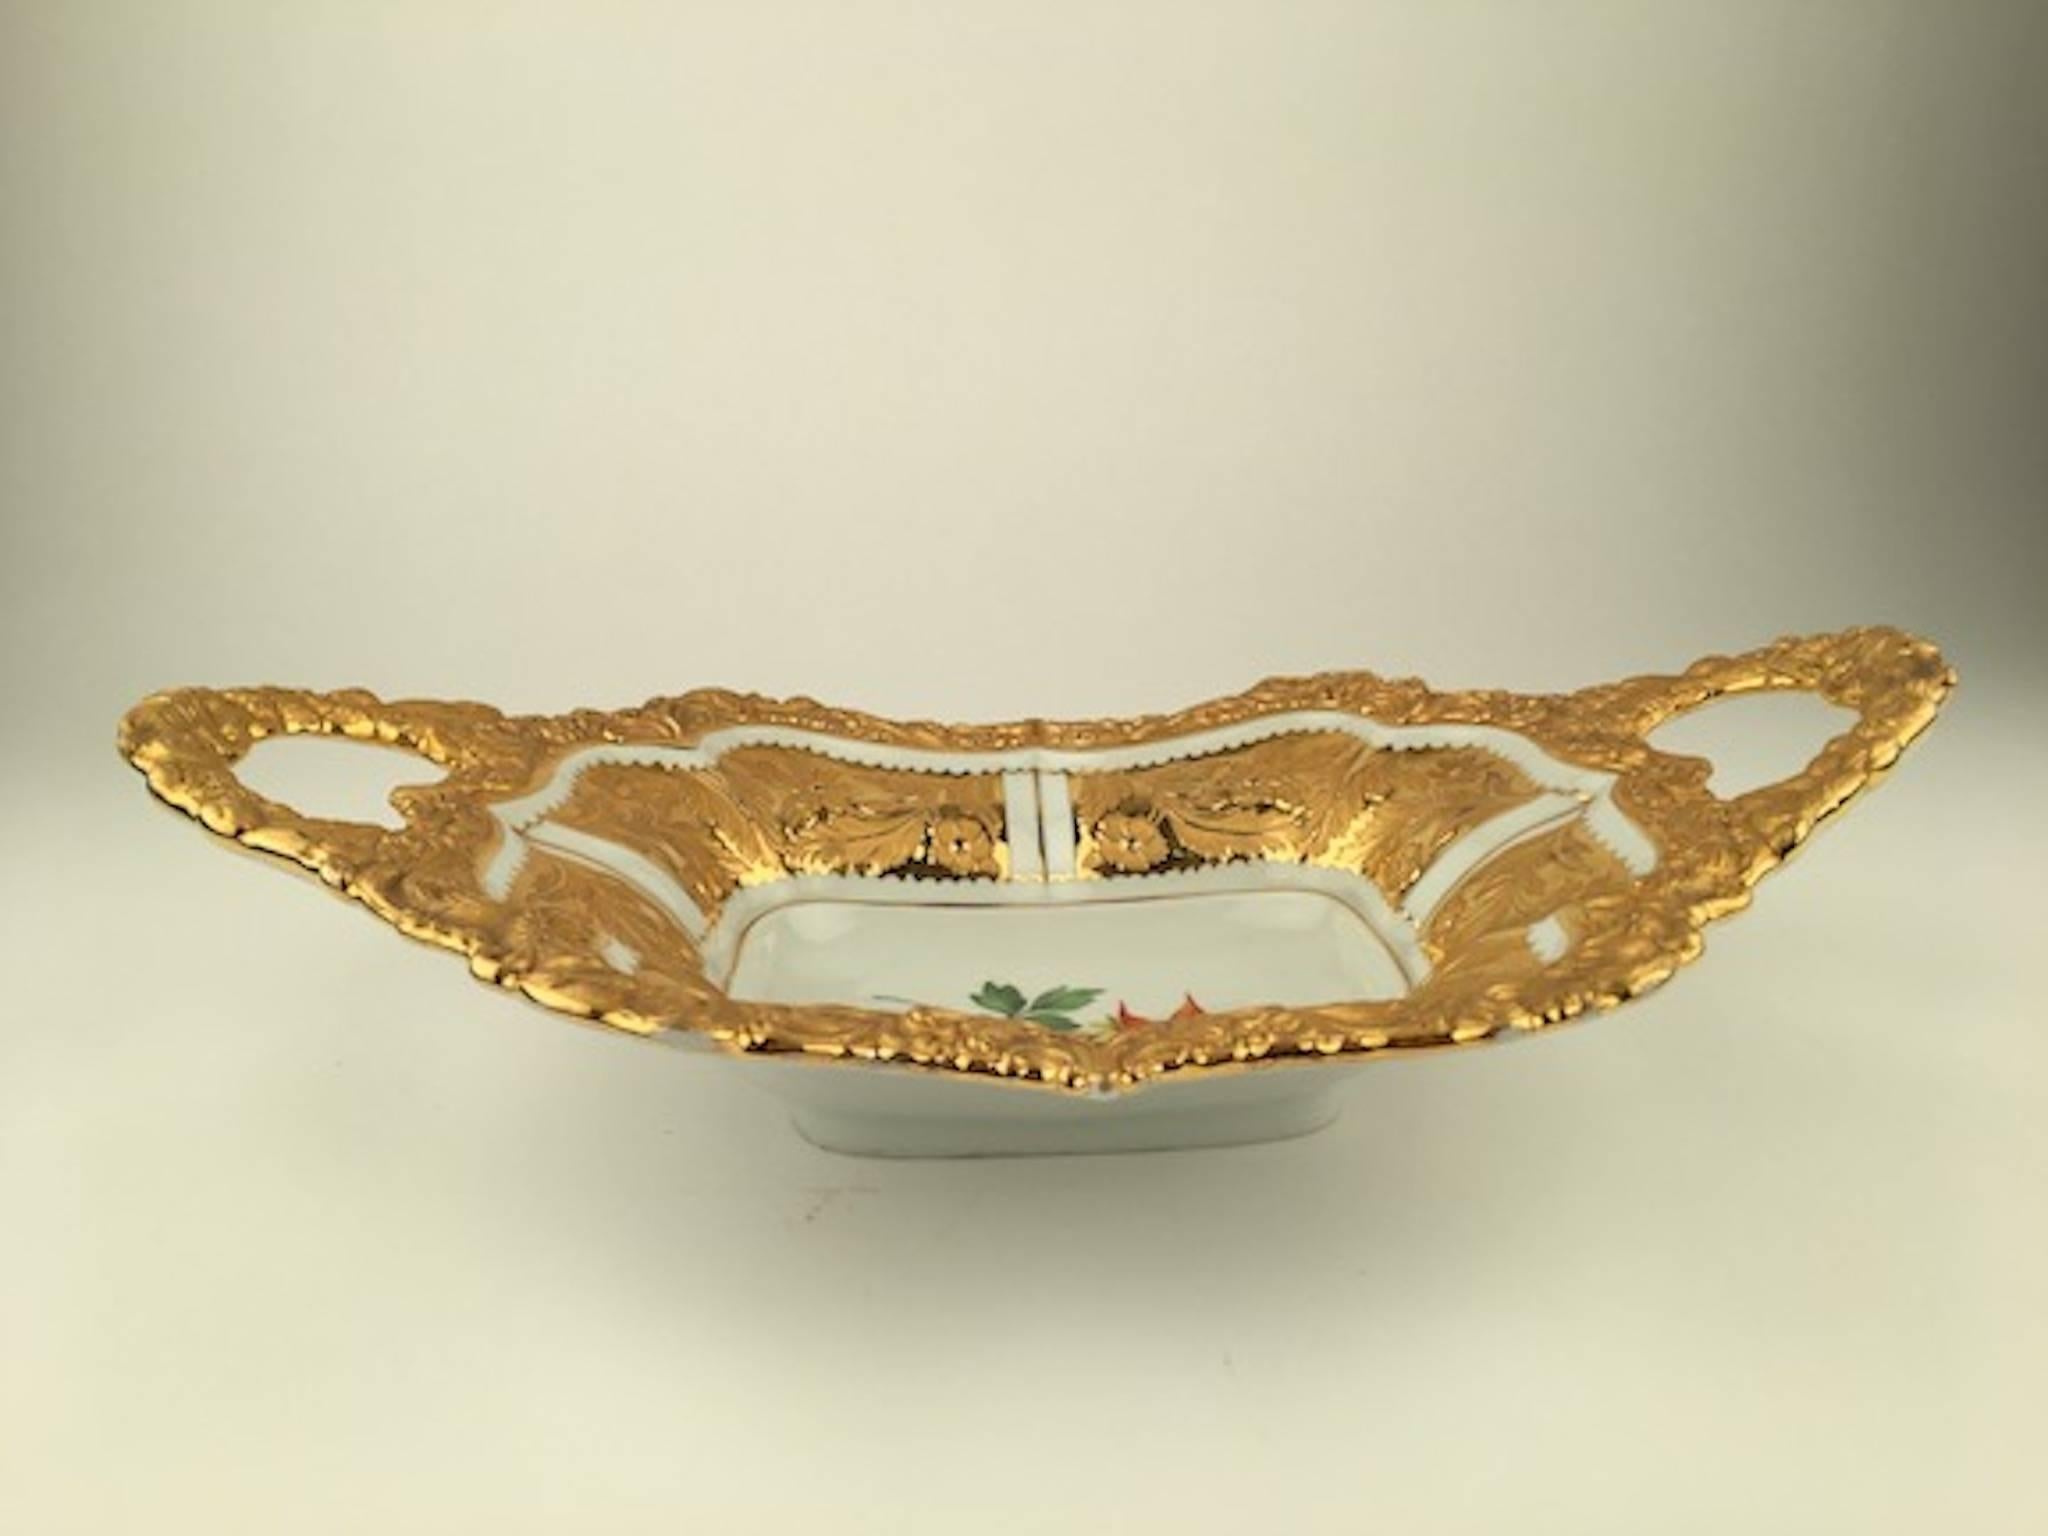 Early 20th century Meissen two handle serving tray with gold gilt handles and boarder.
Marked with the Meissen logo and two slashes under the logo.